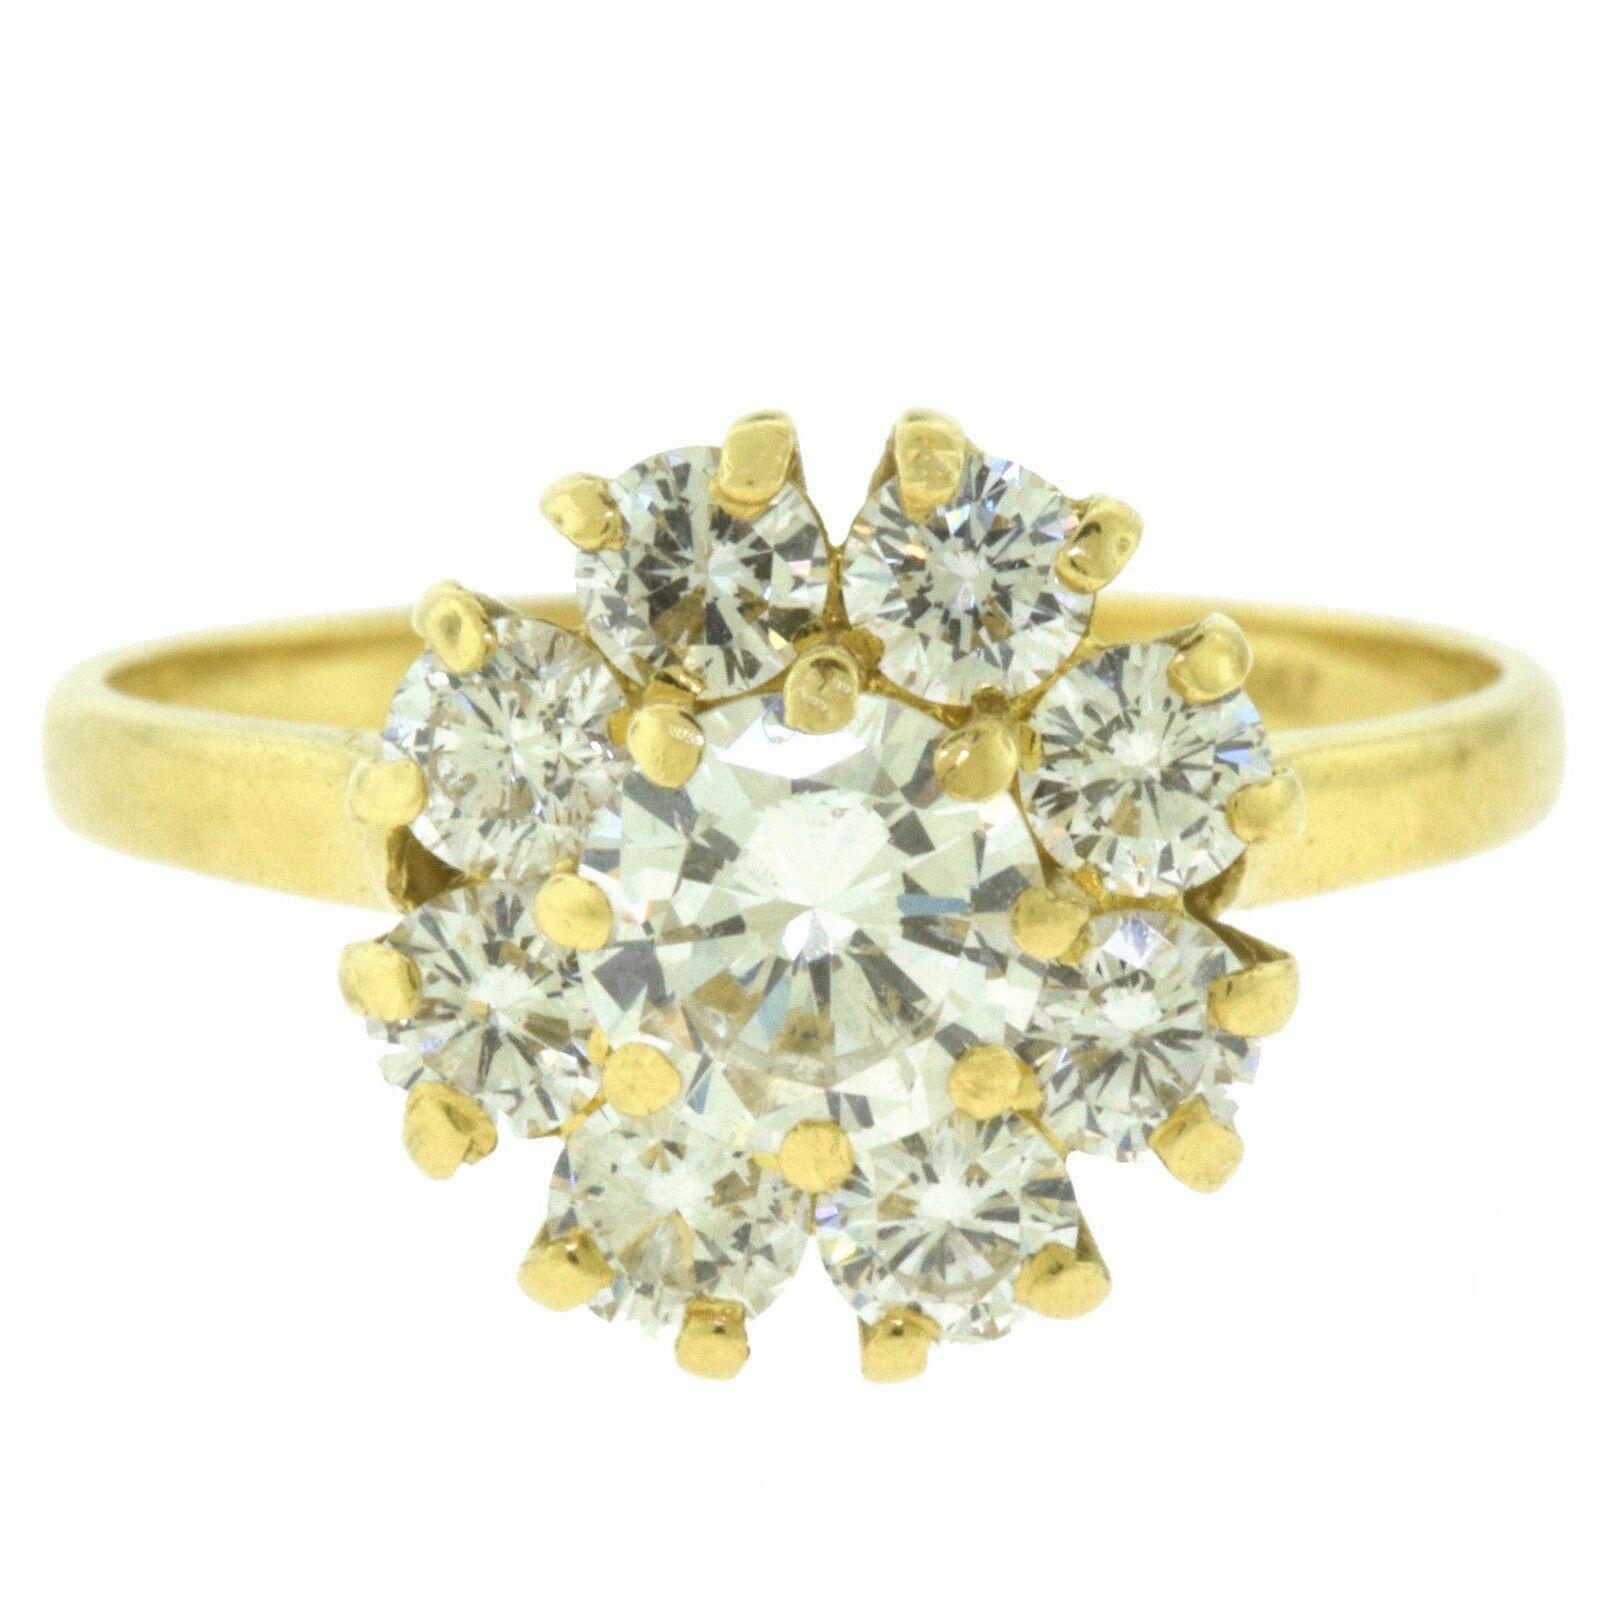 Brilliance Jewels, Miami
Questions? Call Us Anytime!
786,482,8100

Ring Size: 7.5 (sizable) 

Style: Engagement Ring

Metal: Yellow Gold

Metal Purity: 18k 

Stones: 1 Large Round Center Stone = 0.74 ct

                   8 Small Round Diamonds =